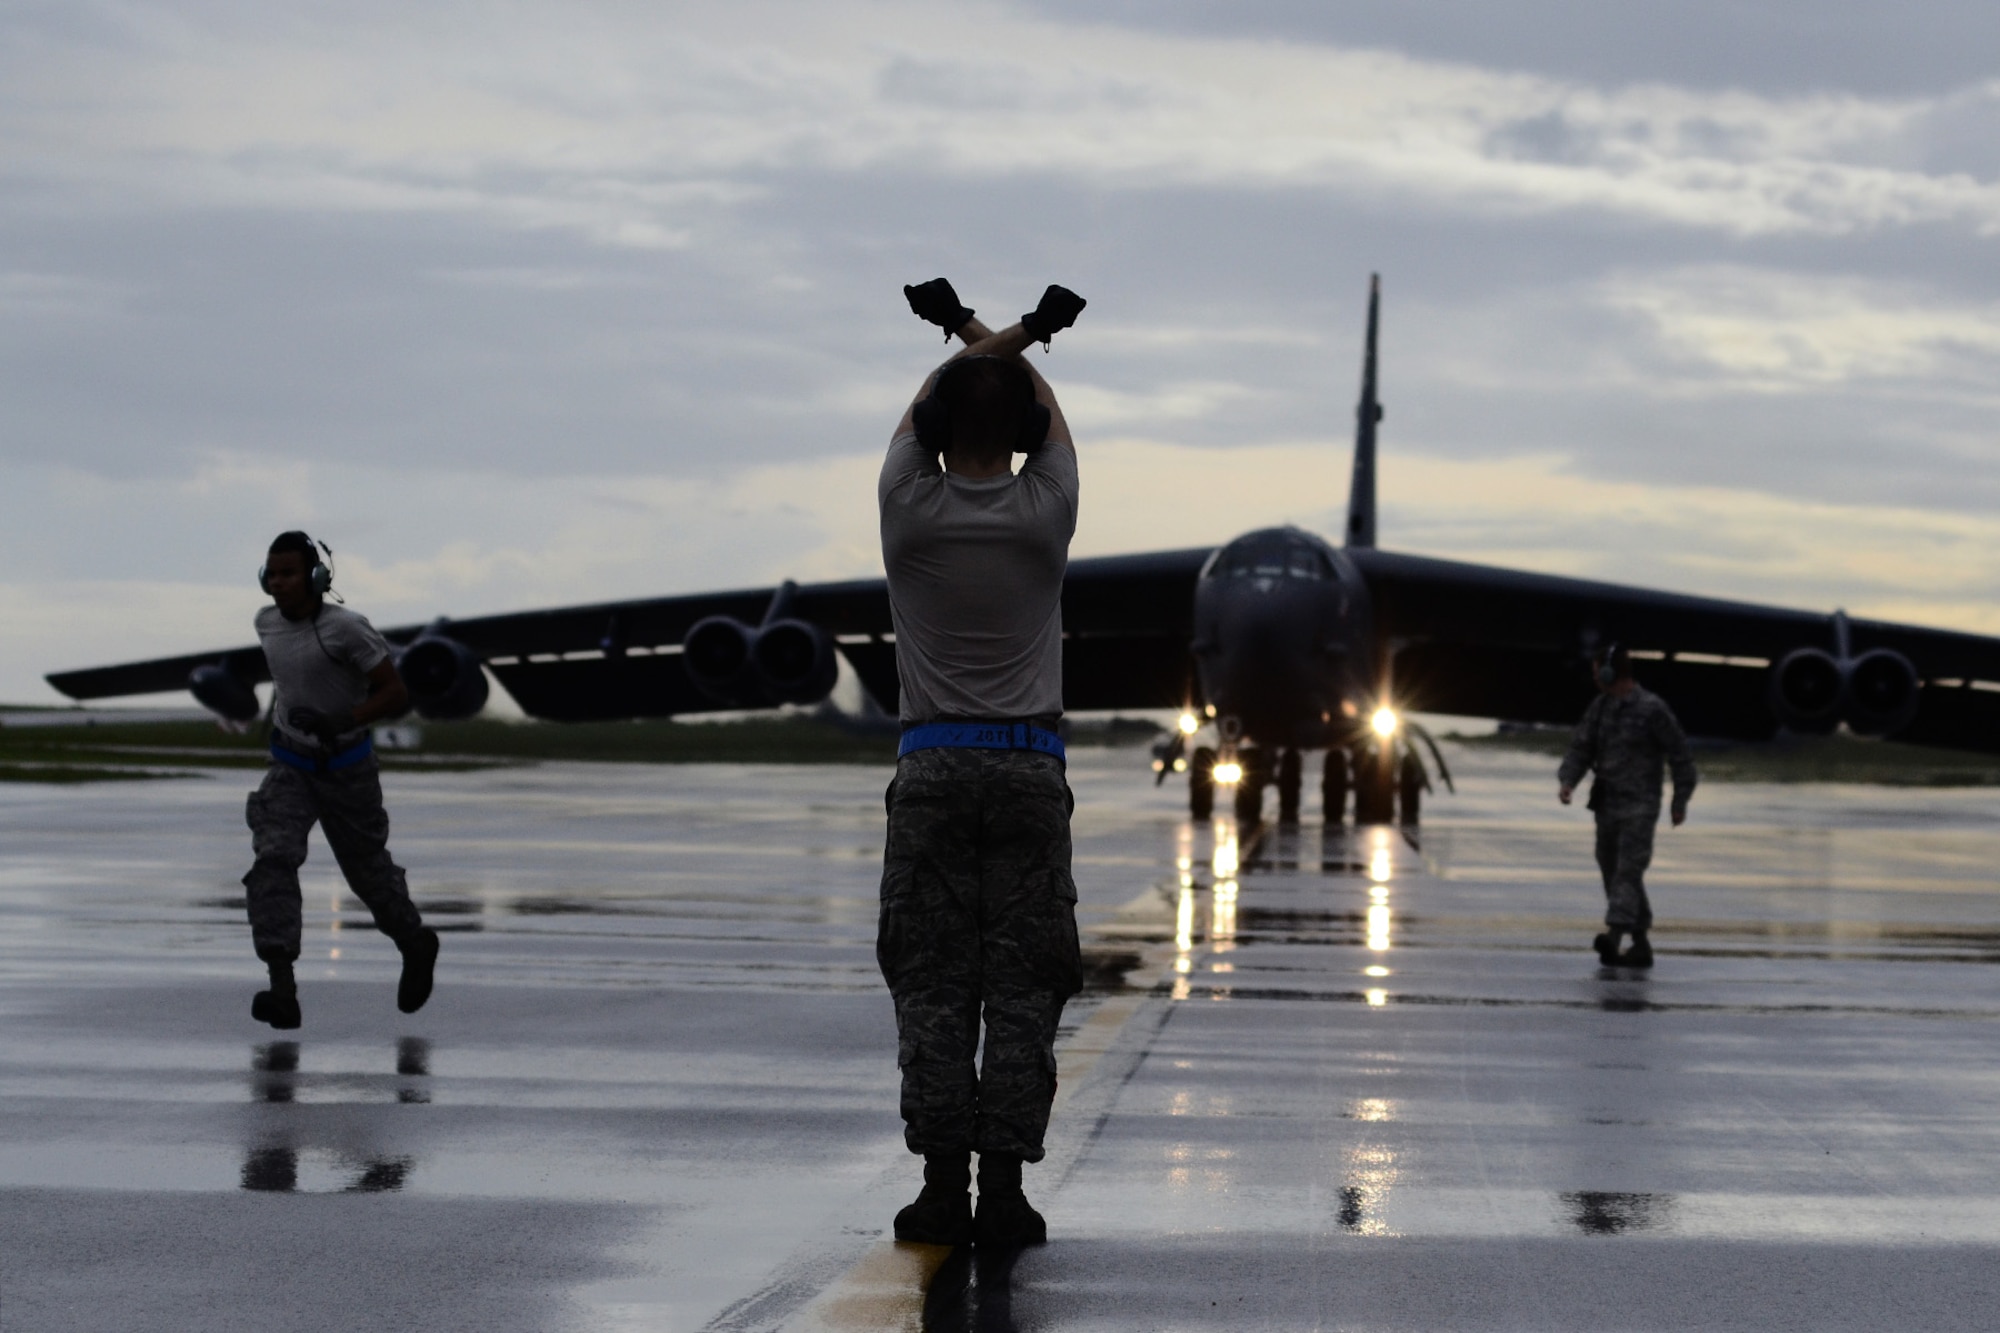 A B-52 Stratofortress crew chief assigned to the 20th Expeditionary Aircraft Maintenance Squadron marshals his aircraft on the flightline Aug. 22, 2015, at Andersen Air Force Base, Guam. Bomber crews with the 20th Expeditionary Bomb Squadron are part of U.S. Pacific Command’s continuous bomber presence and support ongoing operations in the Indo-Asia-Pacific region. (U.S. Air Force photo by Staff Sgt. Alexander W. Riedel/Released)